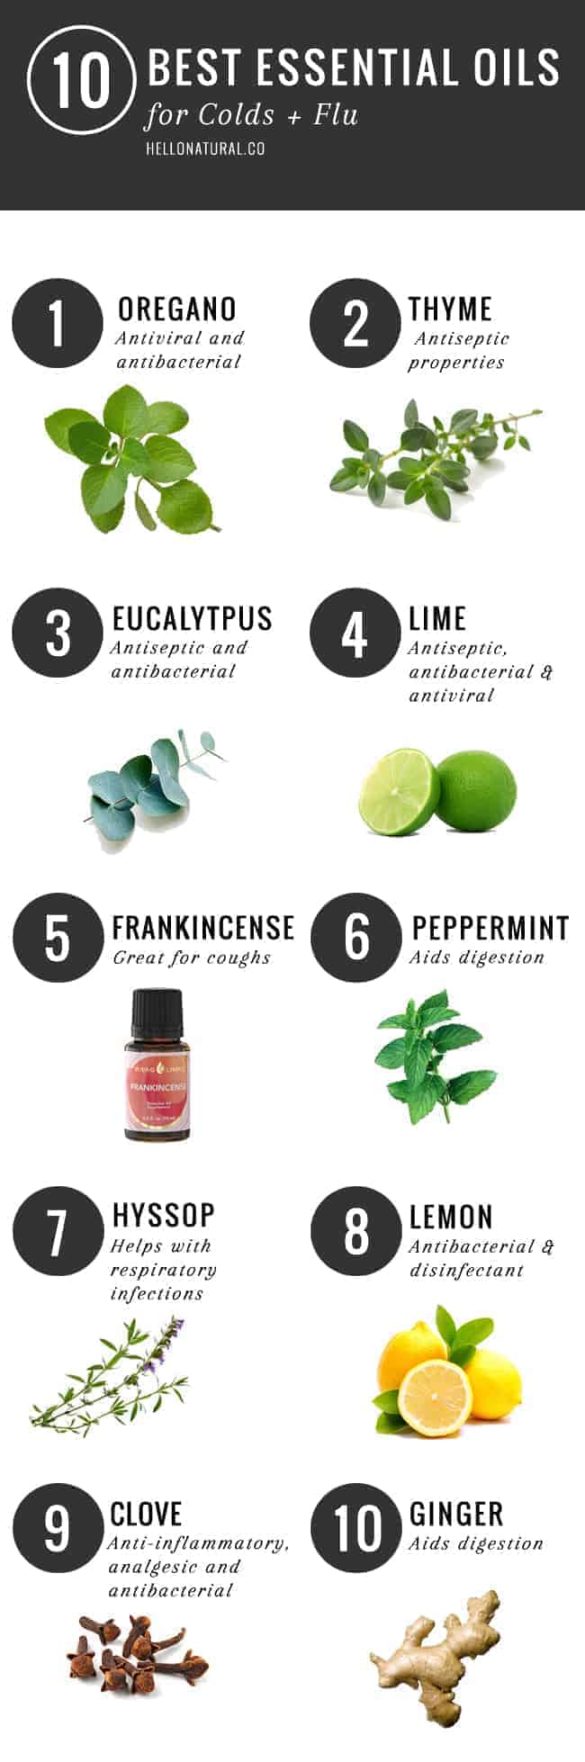 10 Best Essential Oils To Stay Healthy This Winter and Help Treat the Flu and Colds